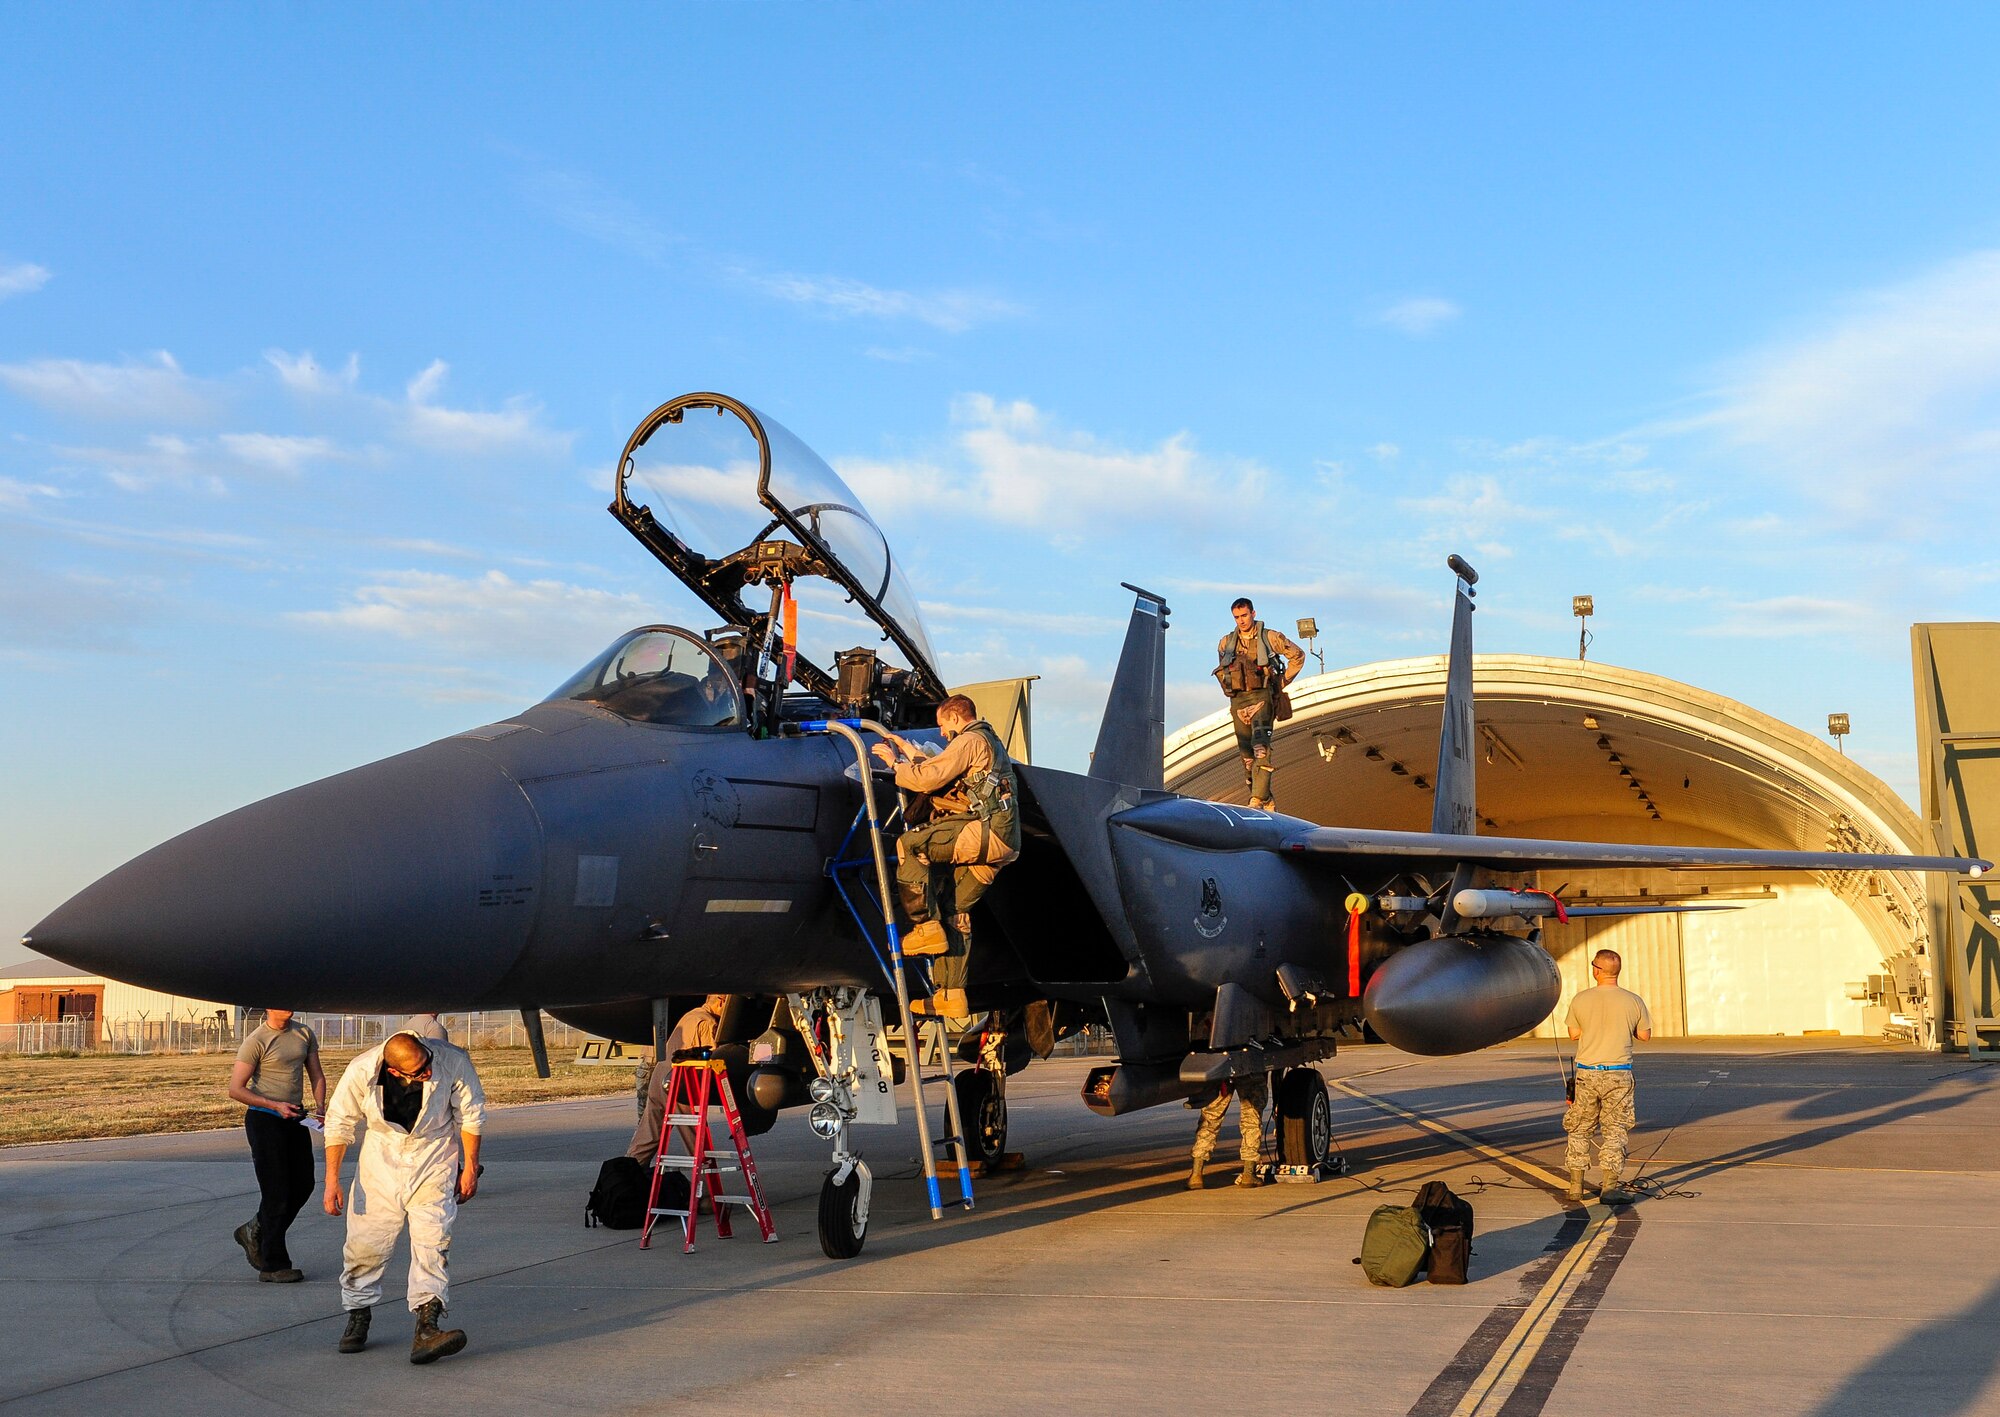 A U.S. Air Force pilot steps out of an F-15E Strike Eagle aircraft shortly after arriving at Incirlik Air Base, Turkey Nov. 12, 2015. Six F-15E Strike Eagles deployed to Incirlik AB from the 48th Fighter Wing, based at RAF Lakenheath, UK, in support of Operation Inherent Resolve and counter-ISIL missions in Iraq and Syria. This dual-role fighter jet is designed to perform air-to-air and air-to-ground missions in all weather conditions. (U.S. Air Force photo by Airman 1st Class Cory W. Bush/Released)